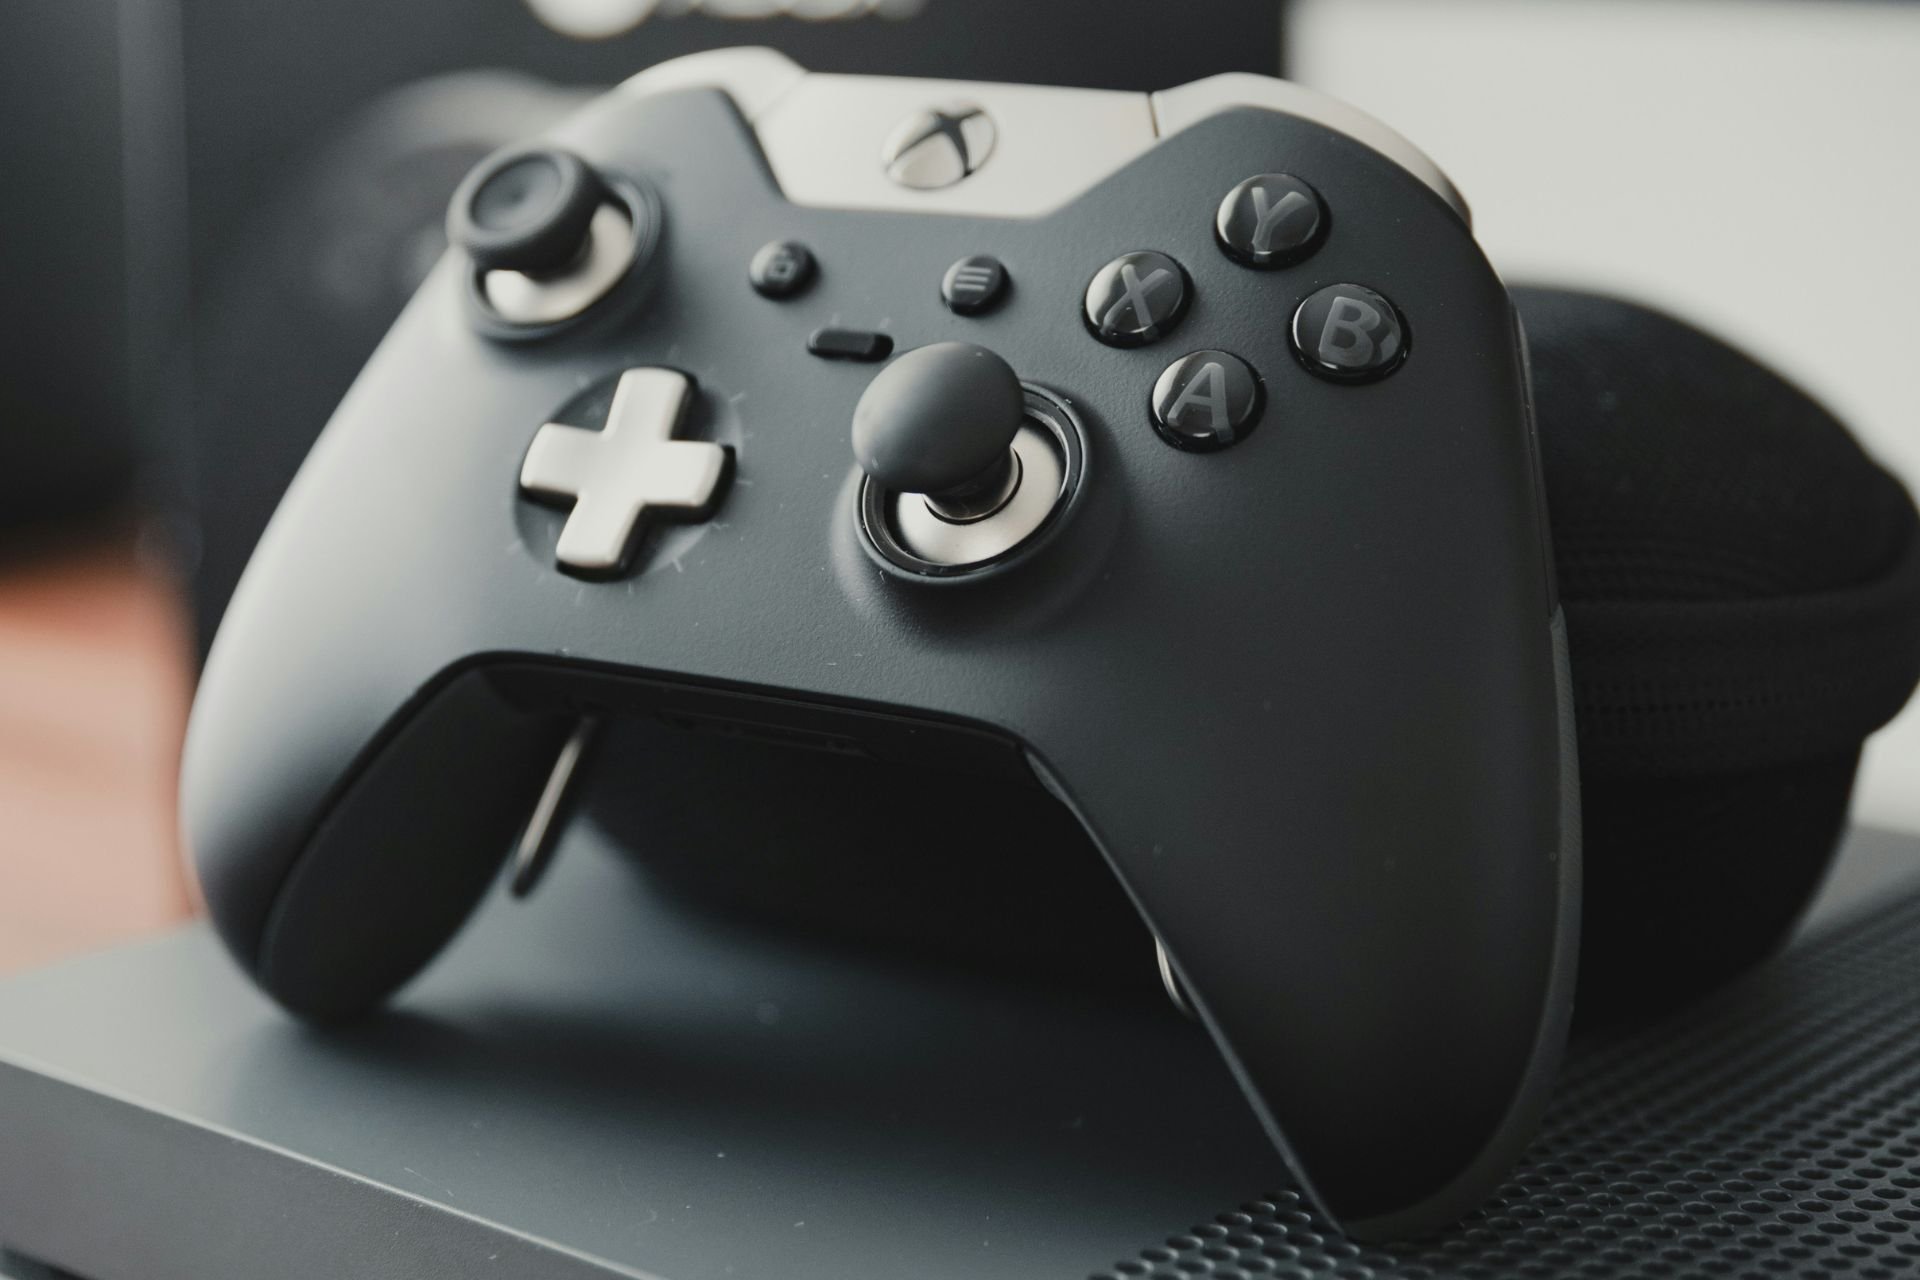 Google Chrome introduces Trigger Rumble for Gamepads; the browser will also support Xbox One Controllers on Windows 10 and later